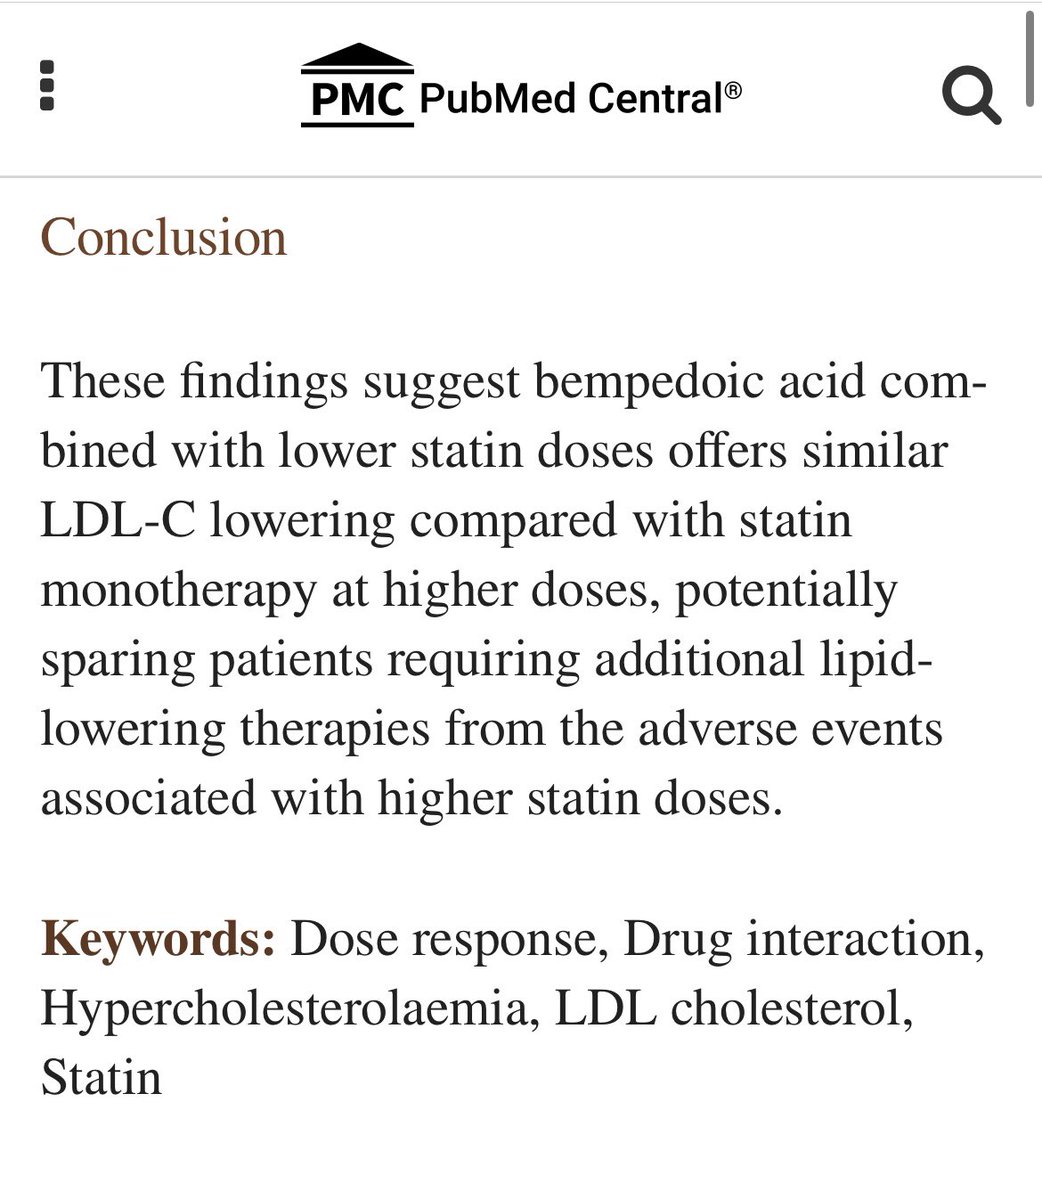 Bempedoic acid may decrease and, in some cases, eliminate the use of statin drugs.   

Unfortunately, it's very expensive and statins are usually covered.